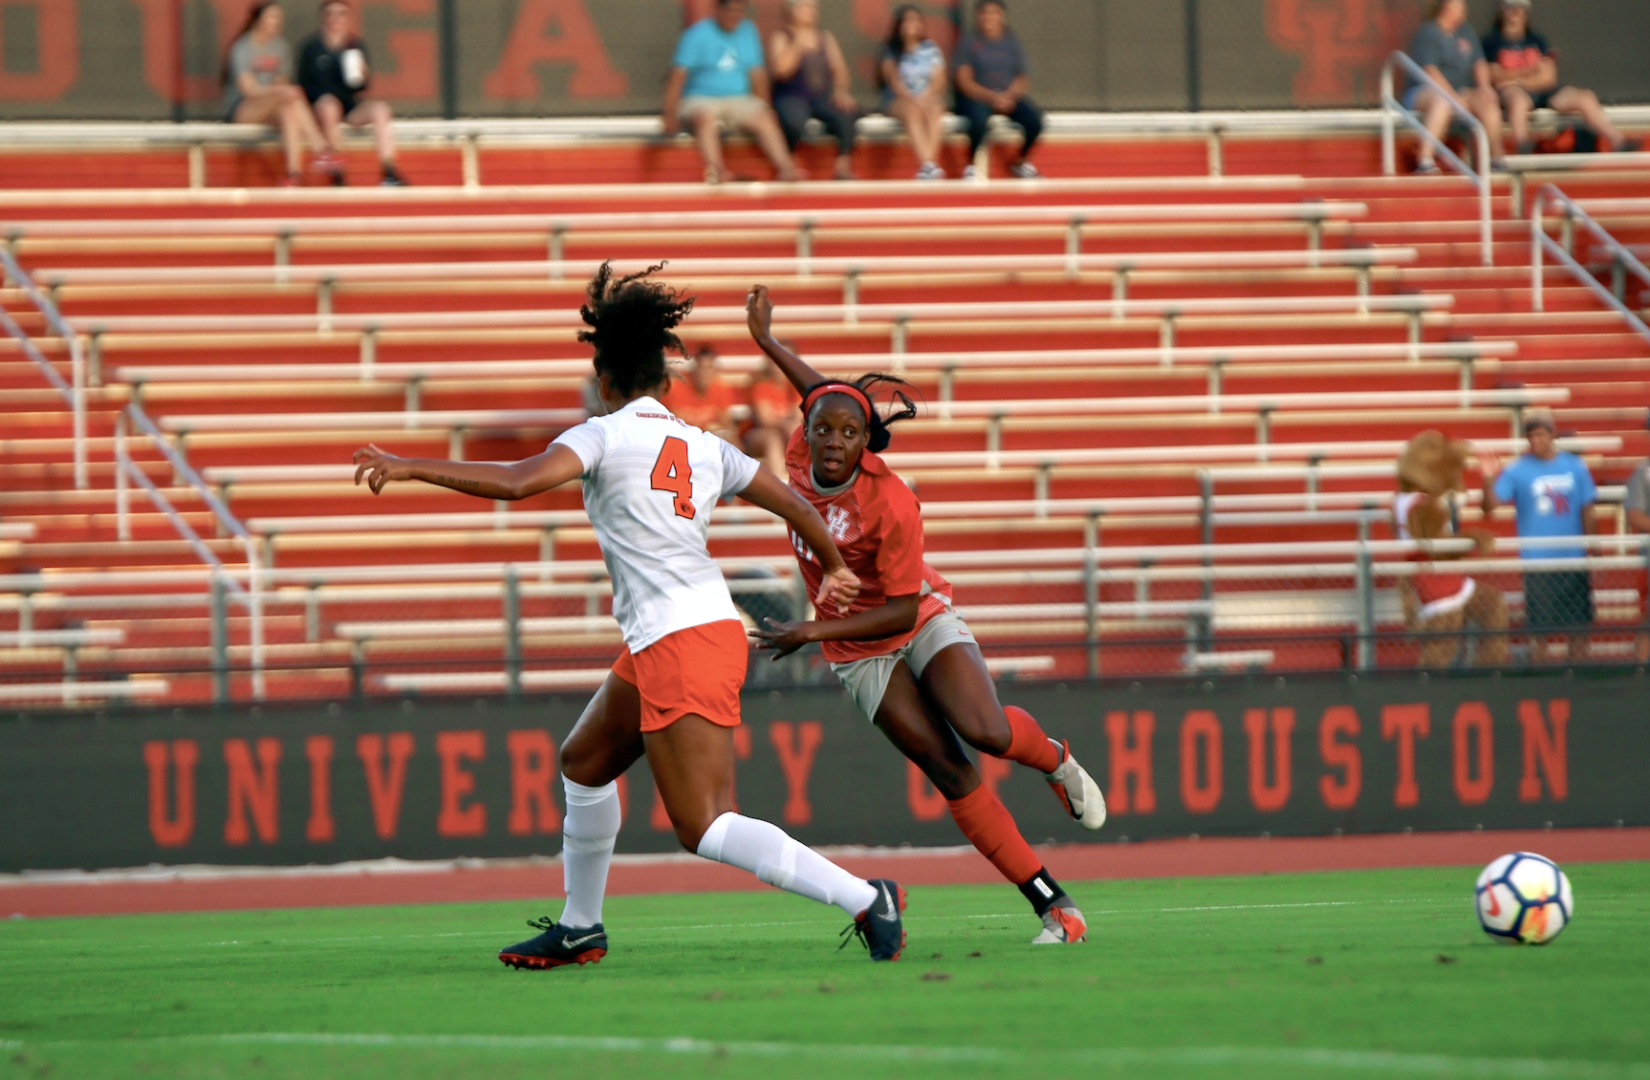 Houston dropped to 2-5 after its 5-0 loss to Oklahoma State. | Lino Sandil/The Cougar